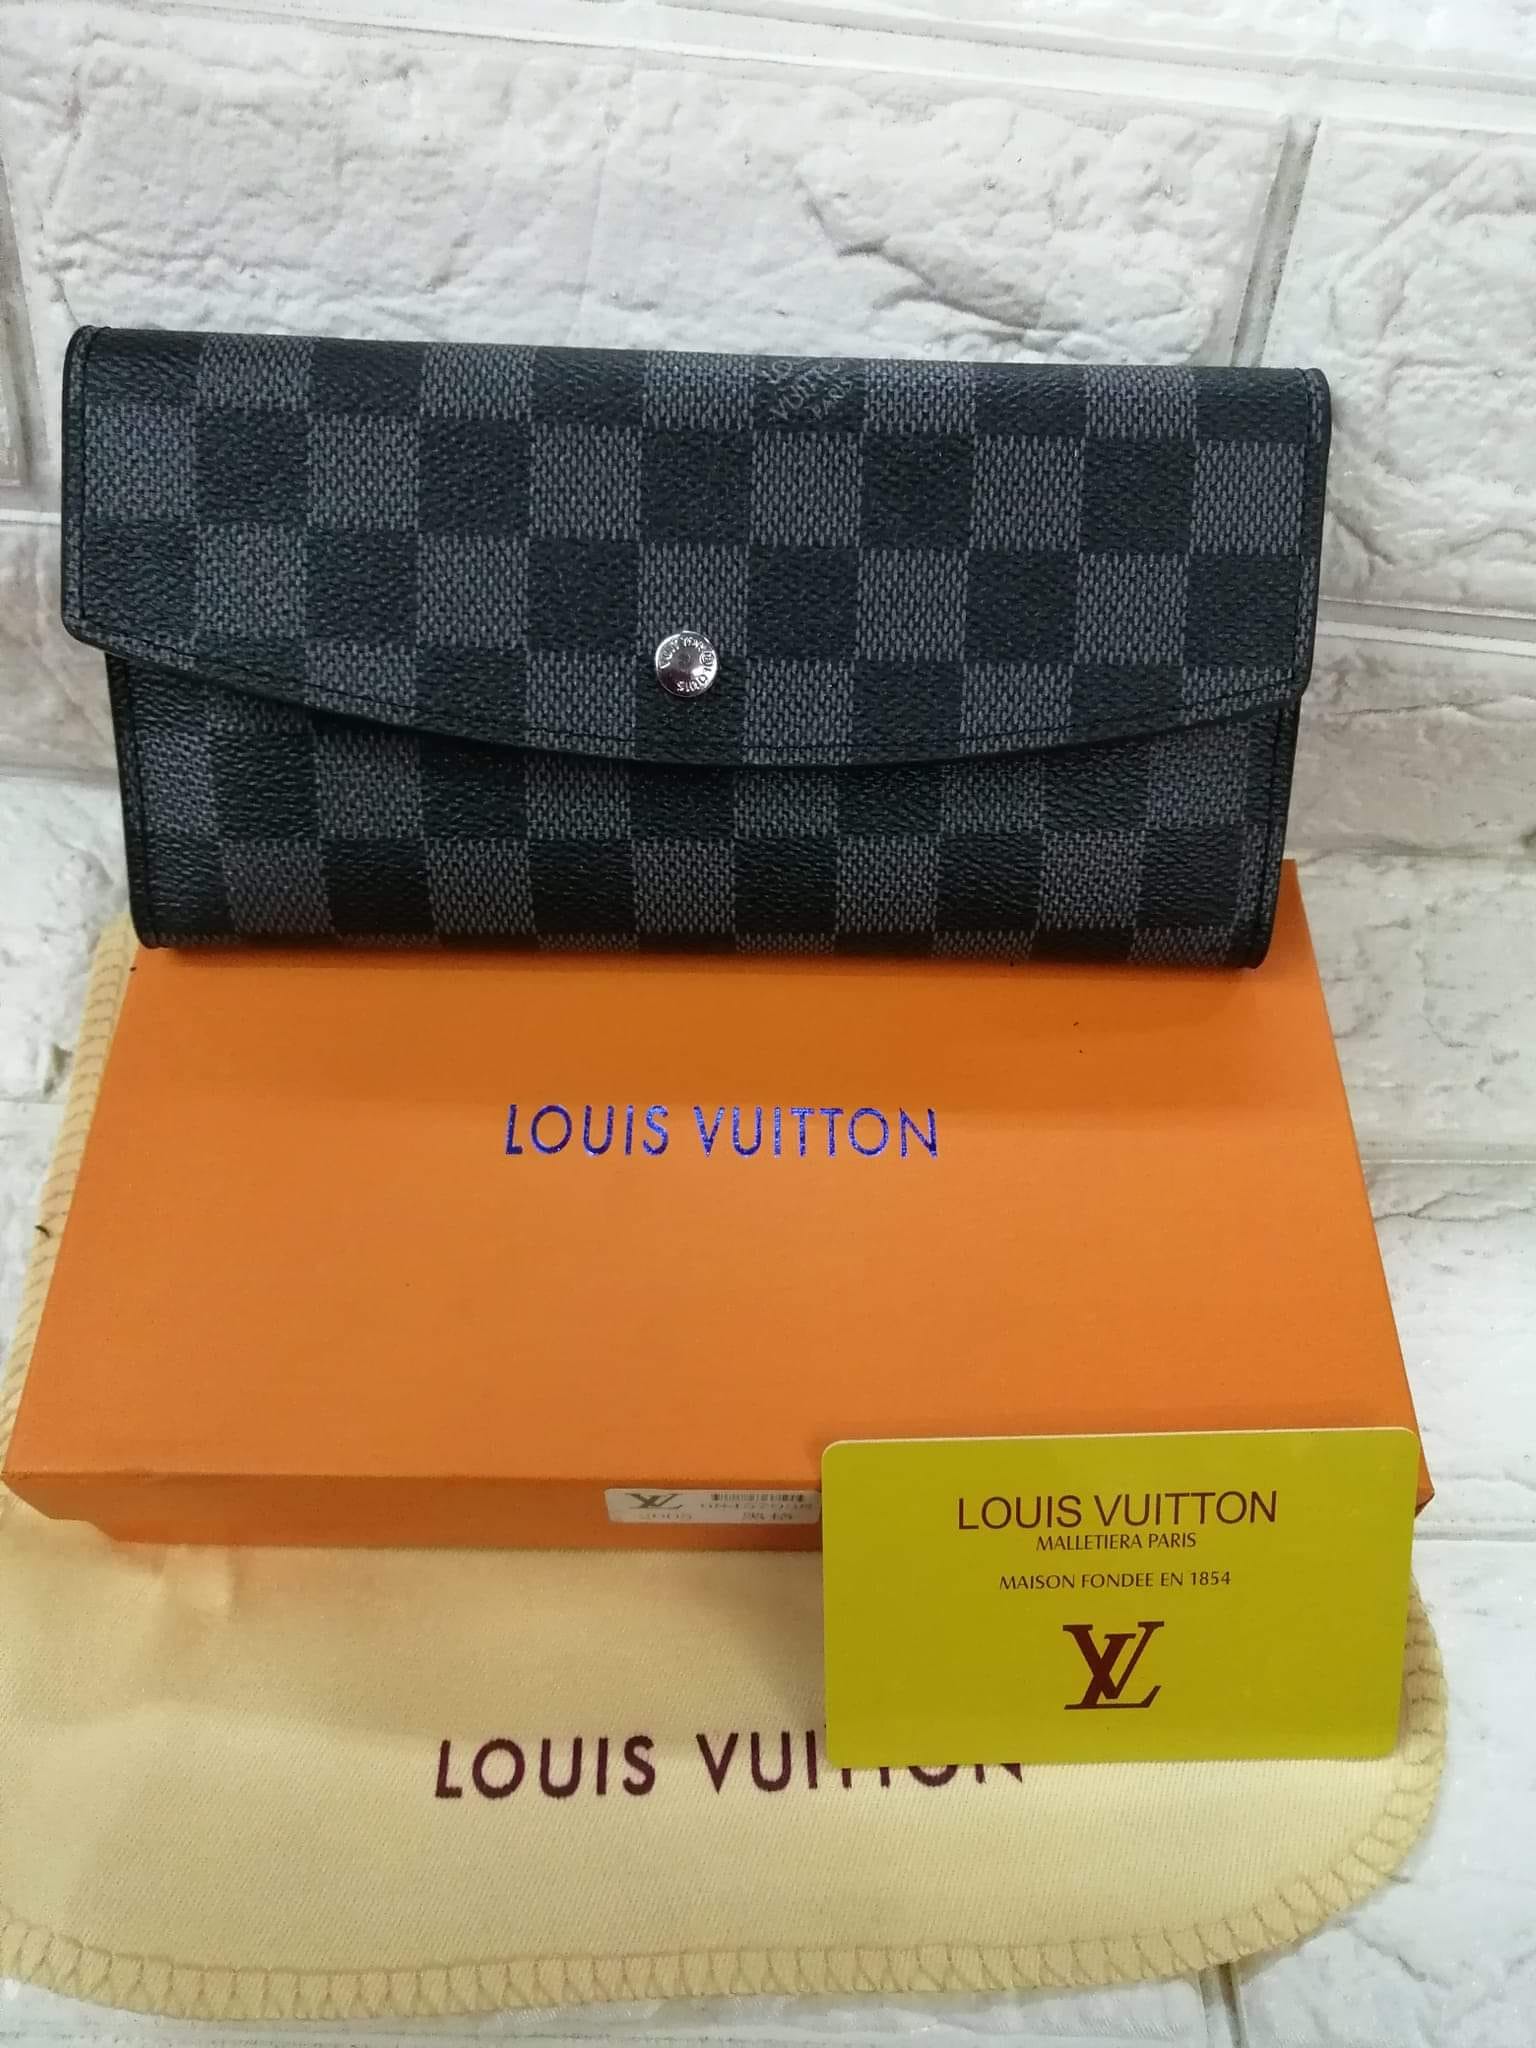 Lv wallet authentic quality